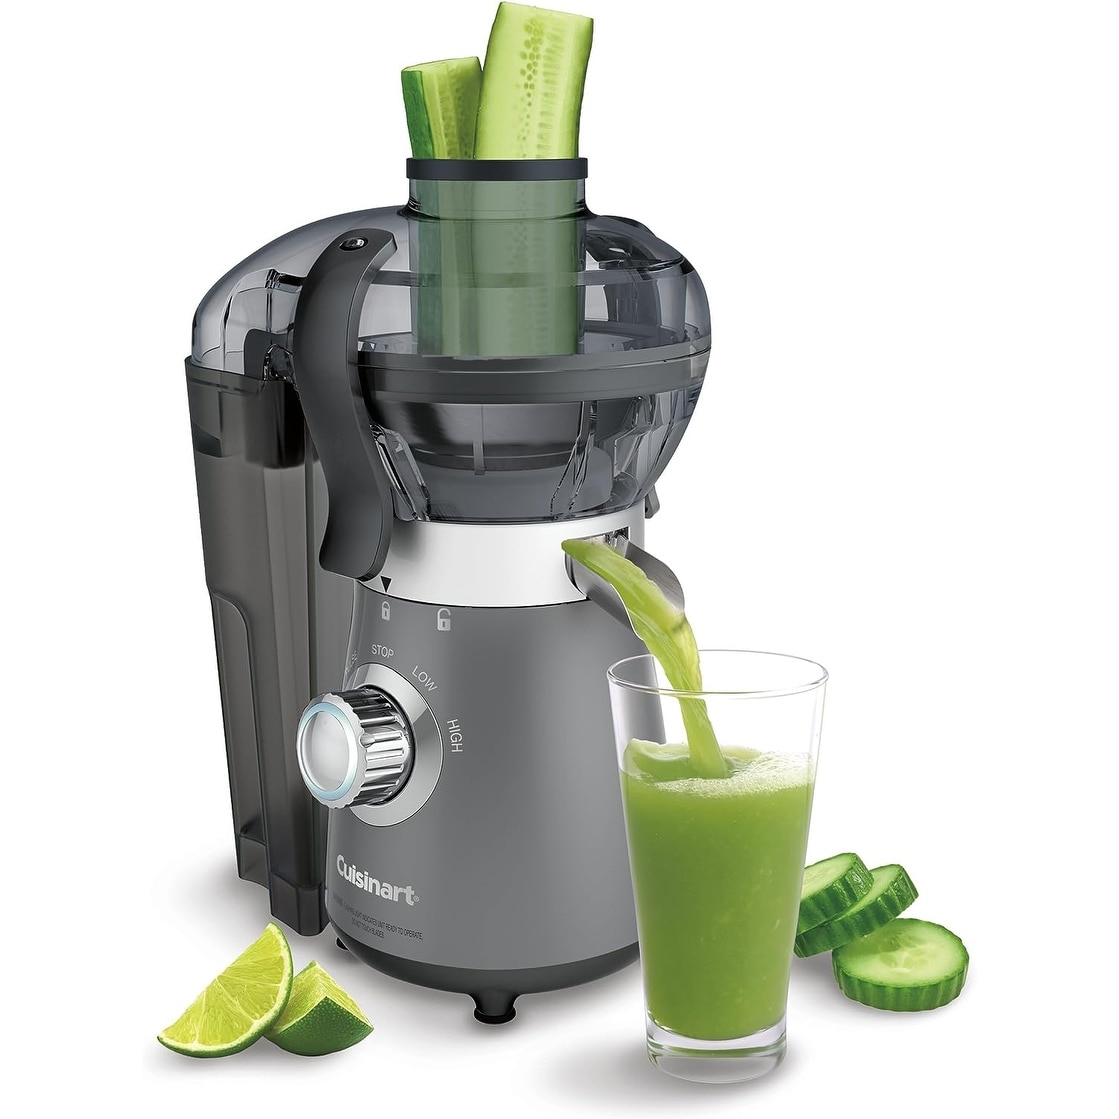 https://ak1.ostkcdn.com/images/products/is/images/direct/aeab0c6c1917aa8e8e133564237c23a369f1e56a/Cuisinart-Compact-Blender-and-Juicer-Combo%2C-One-Size%2C-Stainless-Steel.jpg